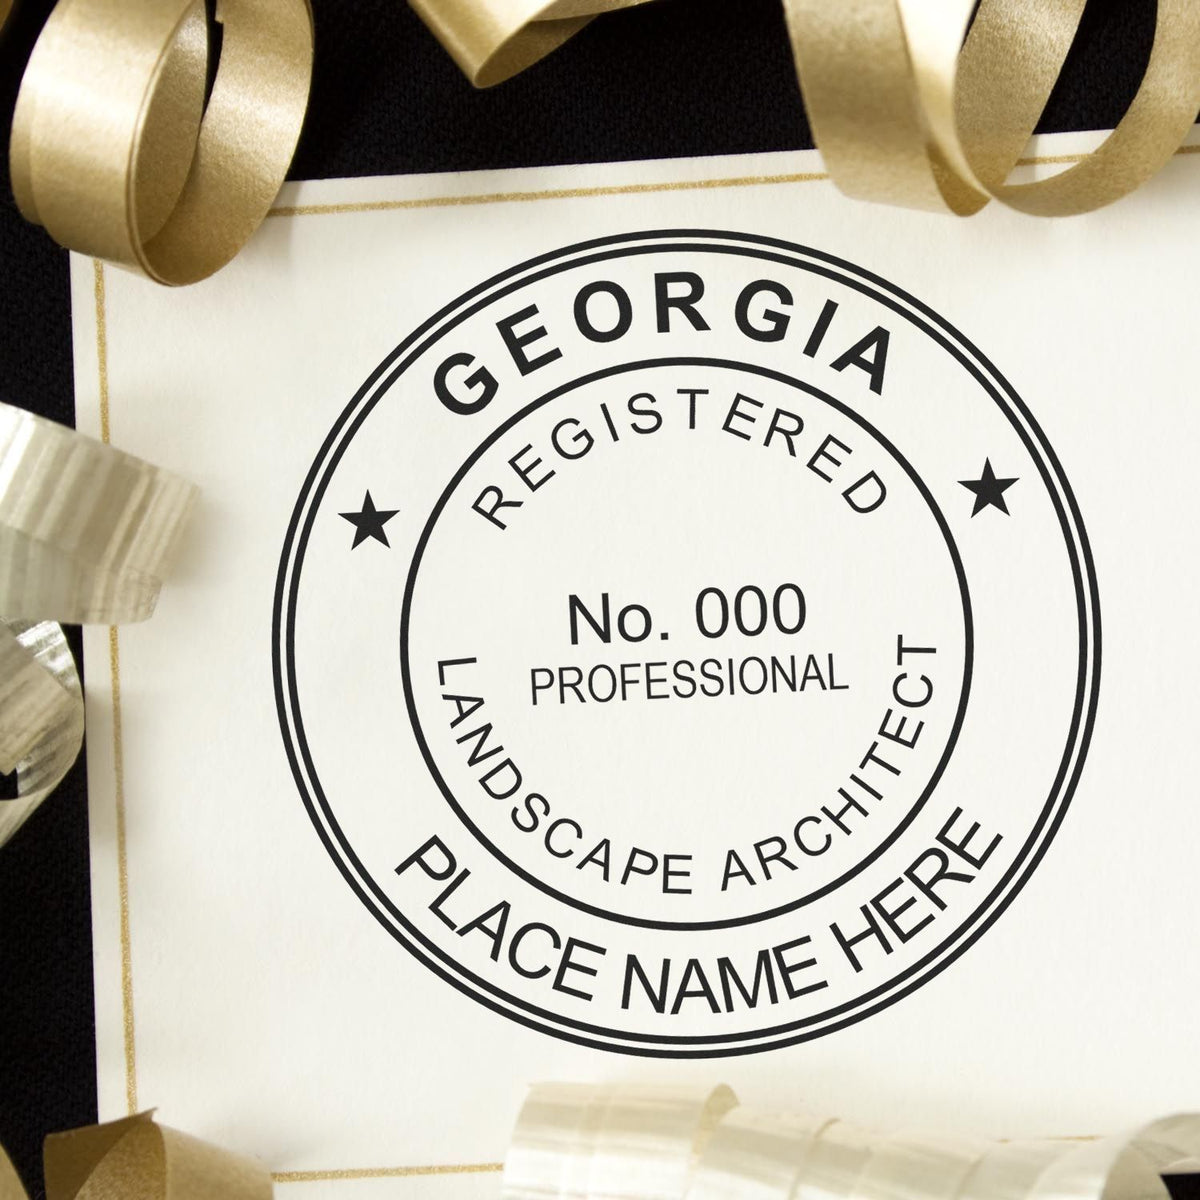 Slim Pre-Inked Georgia Landscape Architect Seal Stamp in use photo showing a stamped imprint of the Slim Pre-Inked Georgia Landscape Architect Seal Stamp